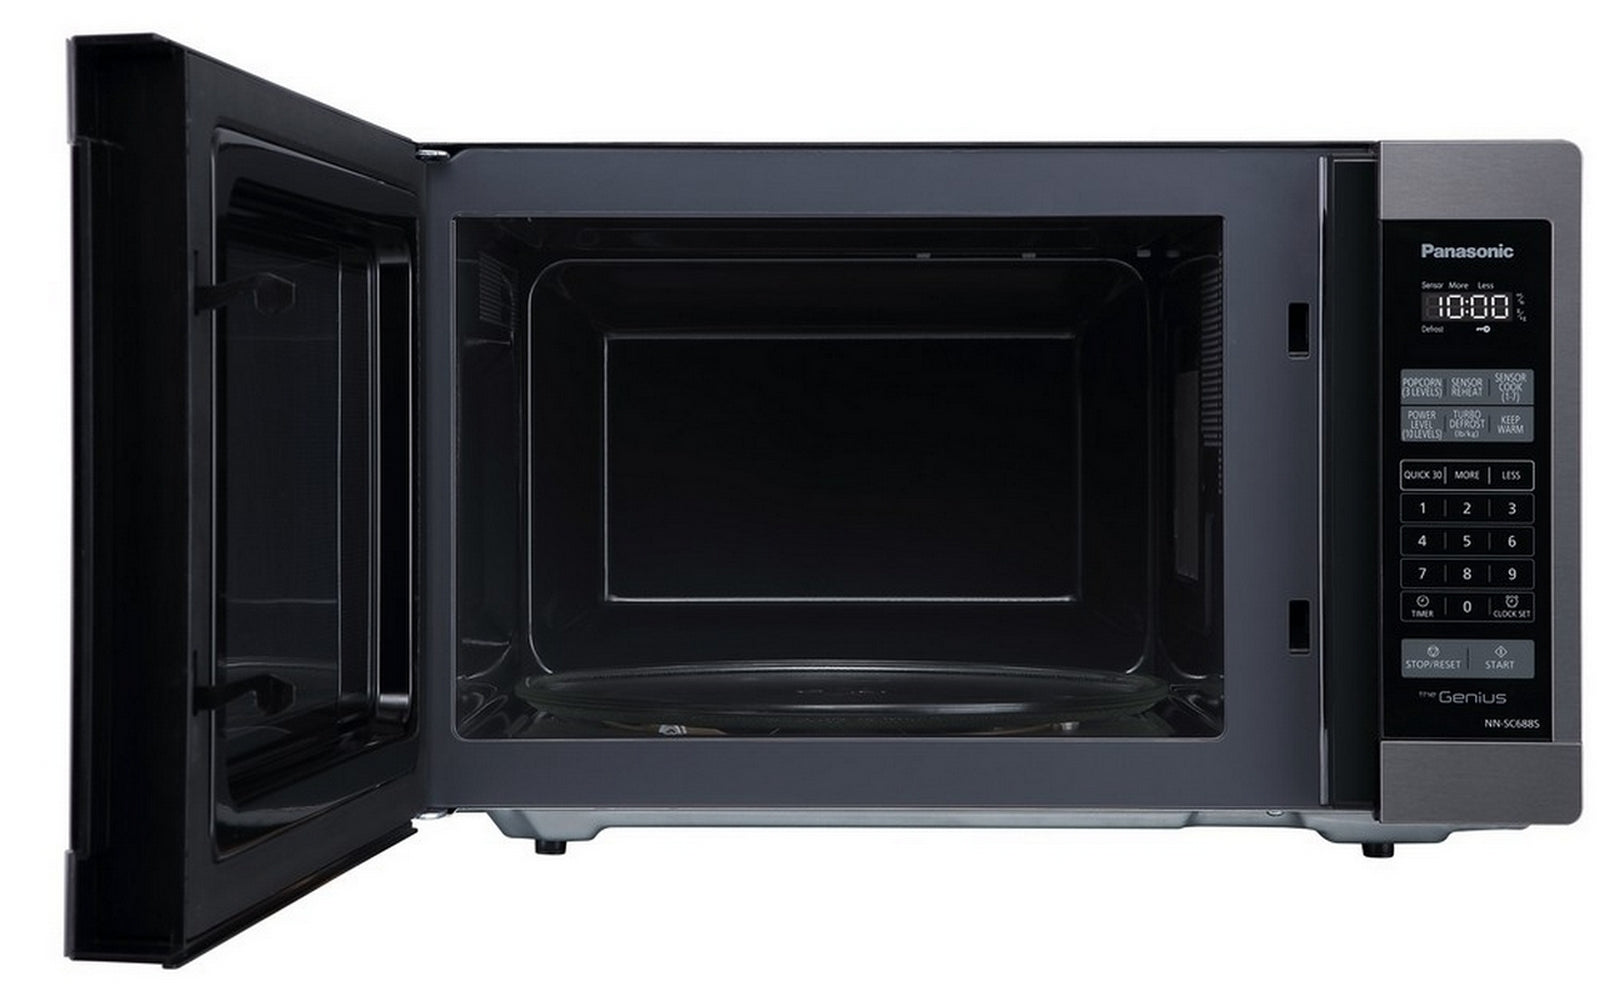 Panasonic - 1.3 cu. Ft  Counter top Microwave in Black Stainless - NNSC688S